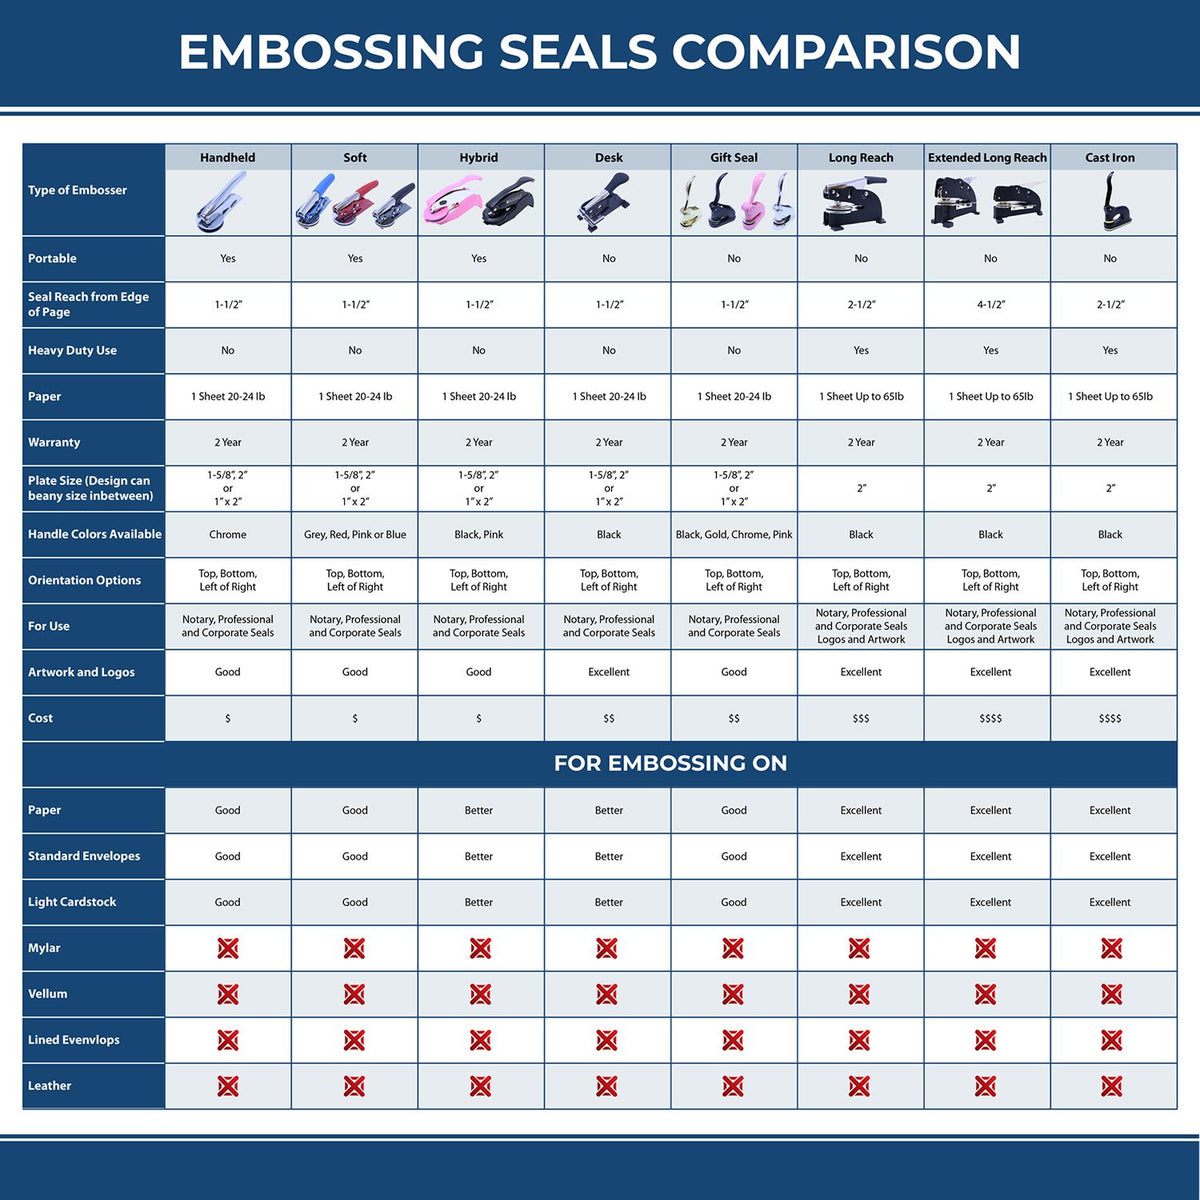 A comparison chart for the different types of mount models available for the Soft Missouri Professional Geologist Seal